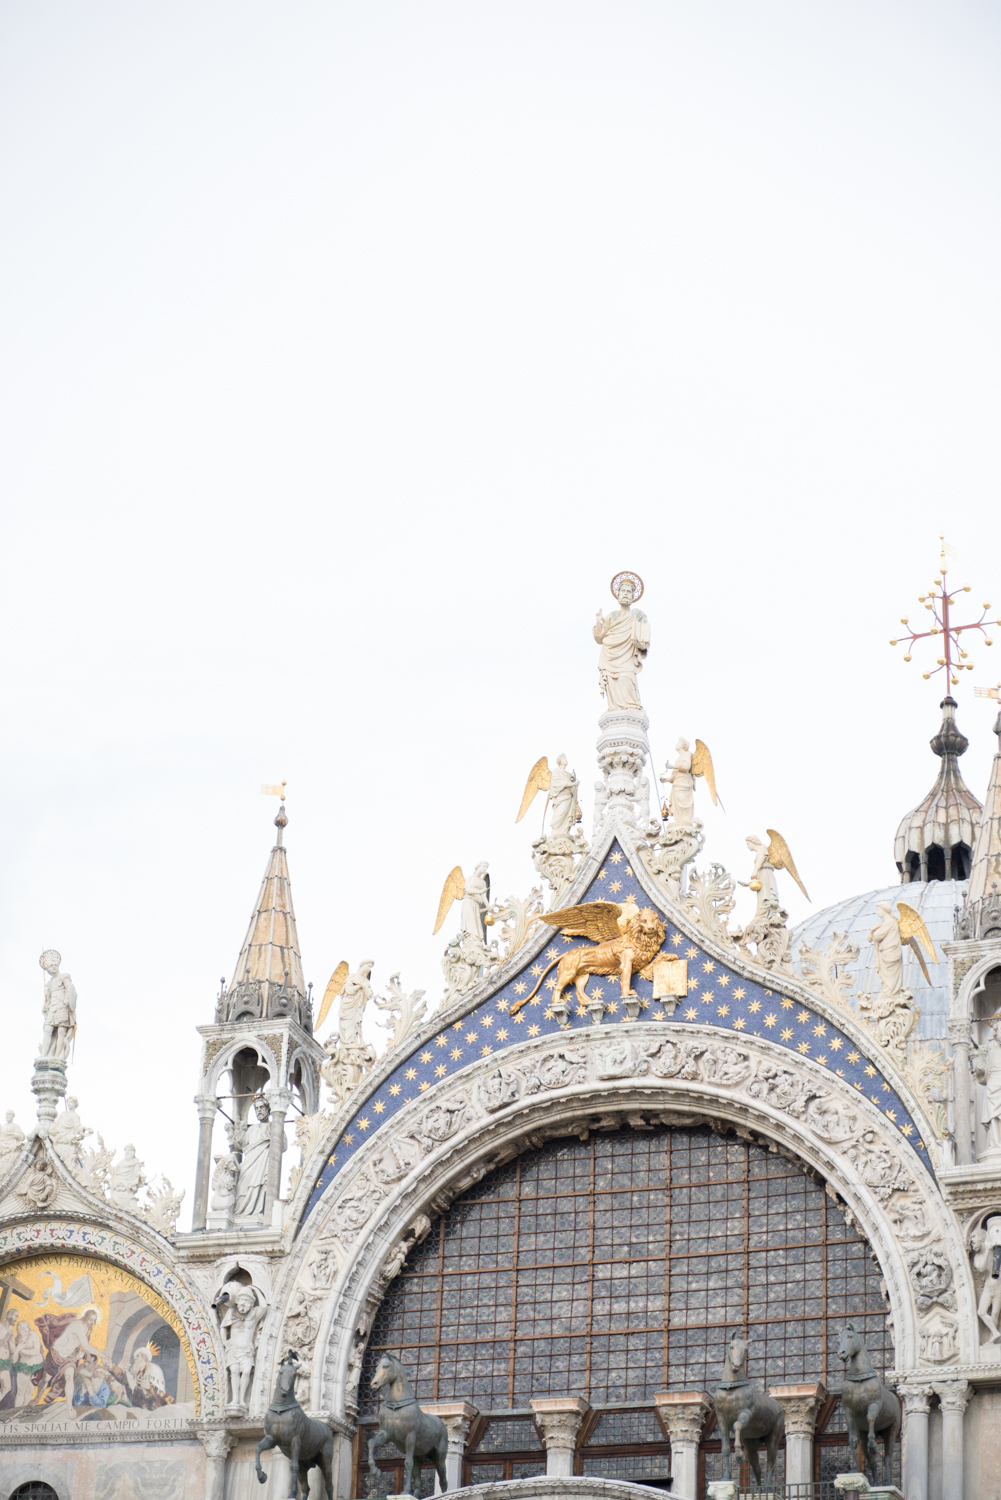 Detail from the San Marco basilica